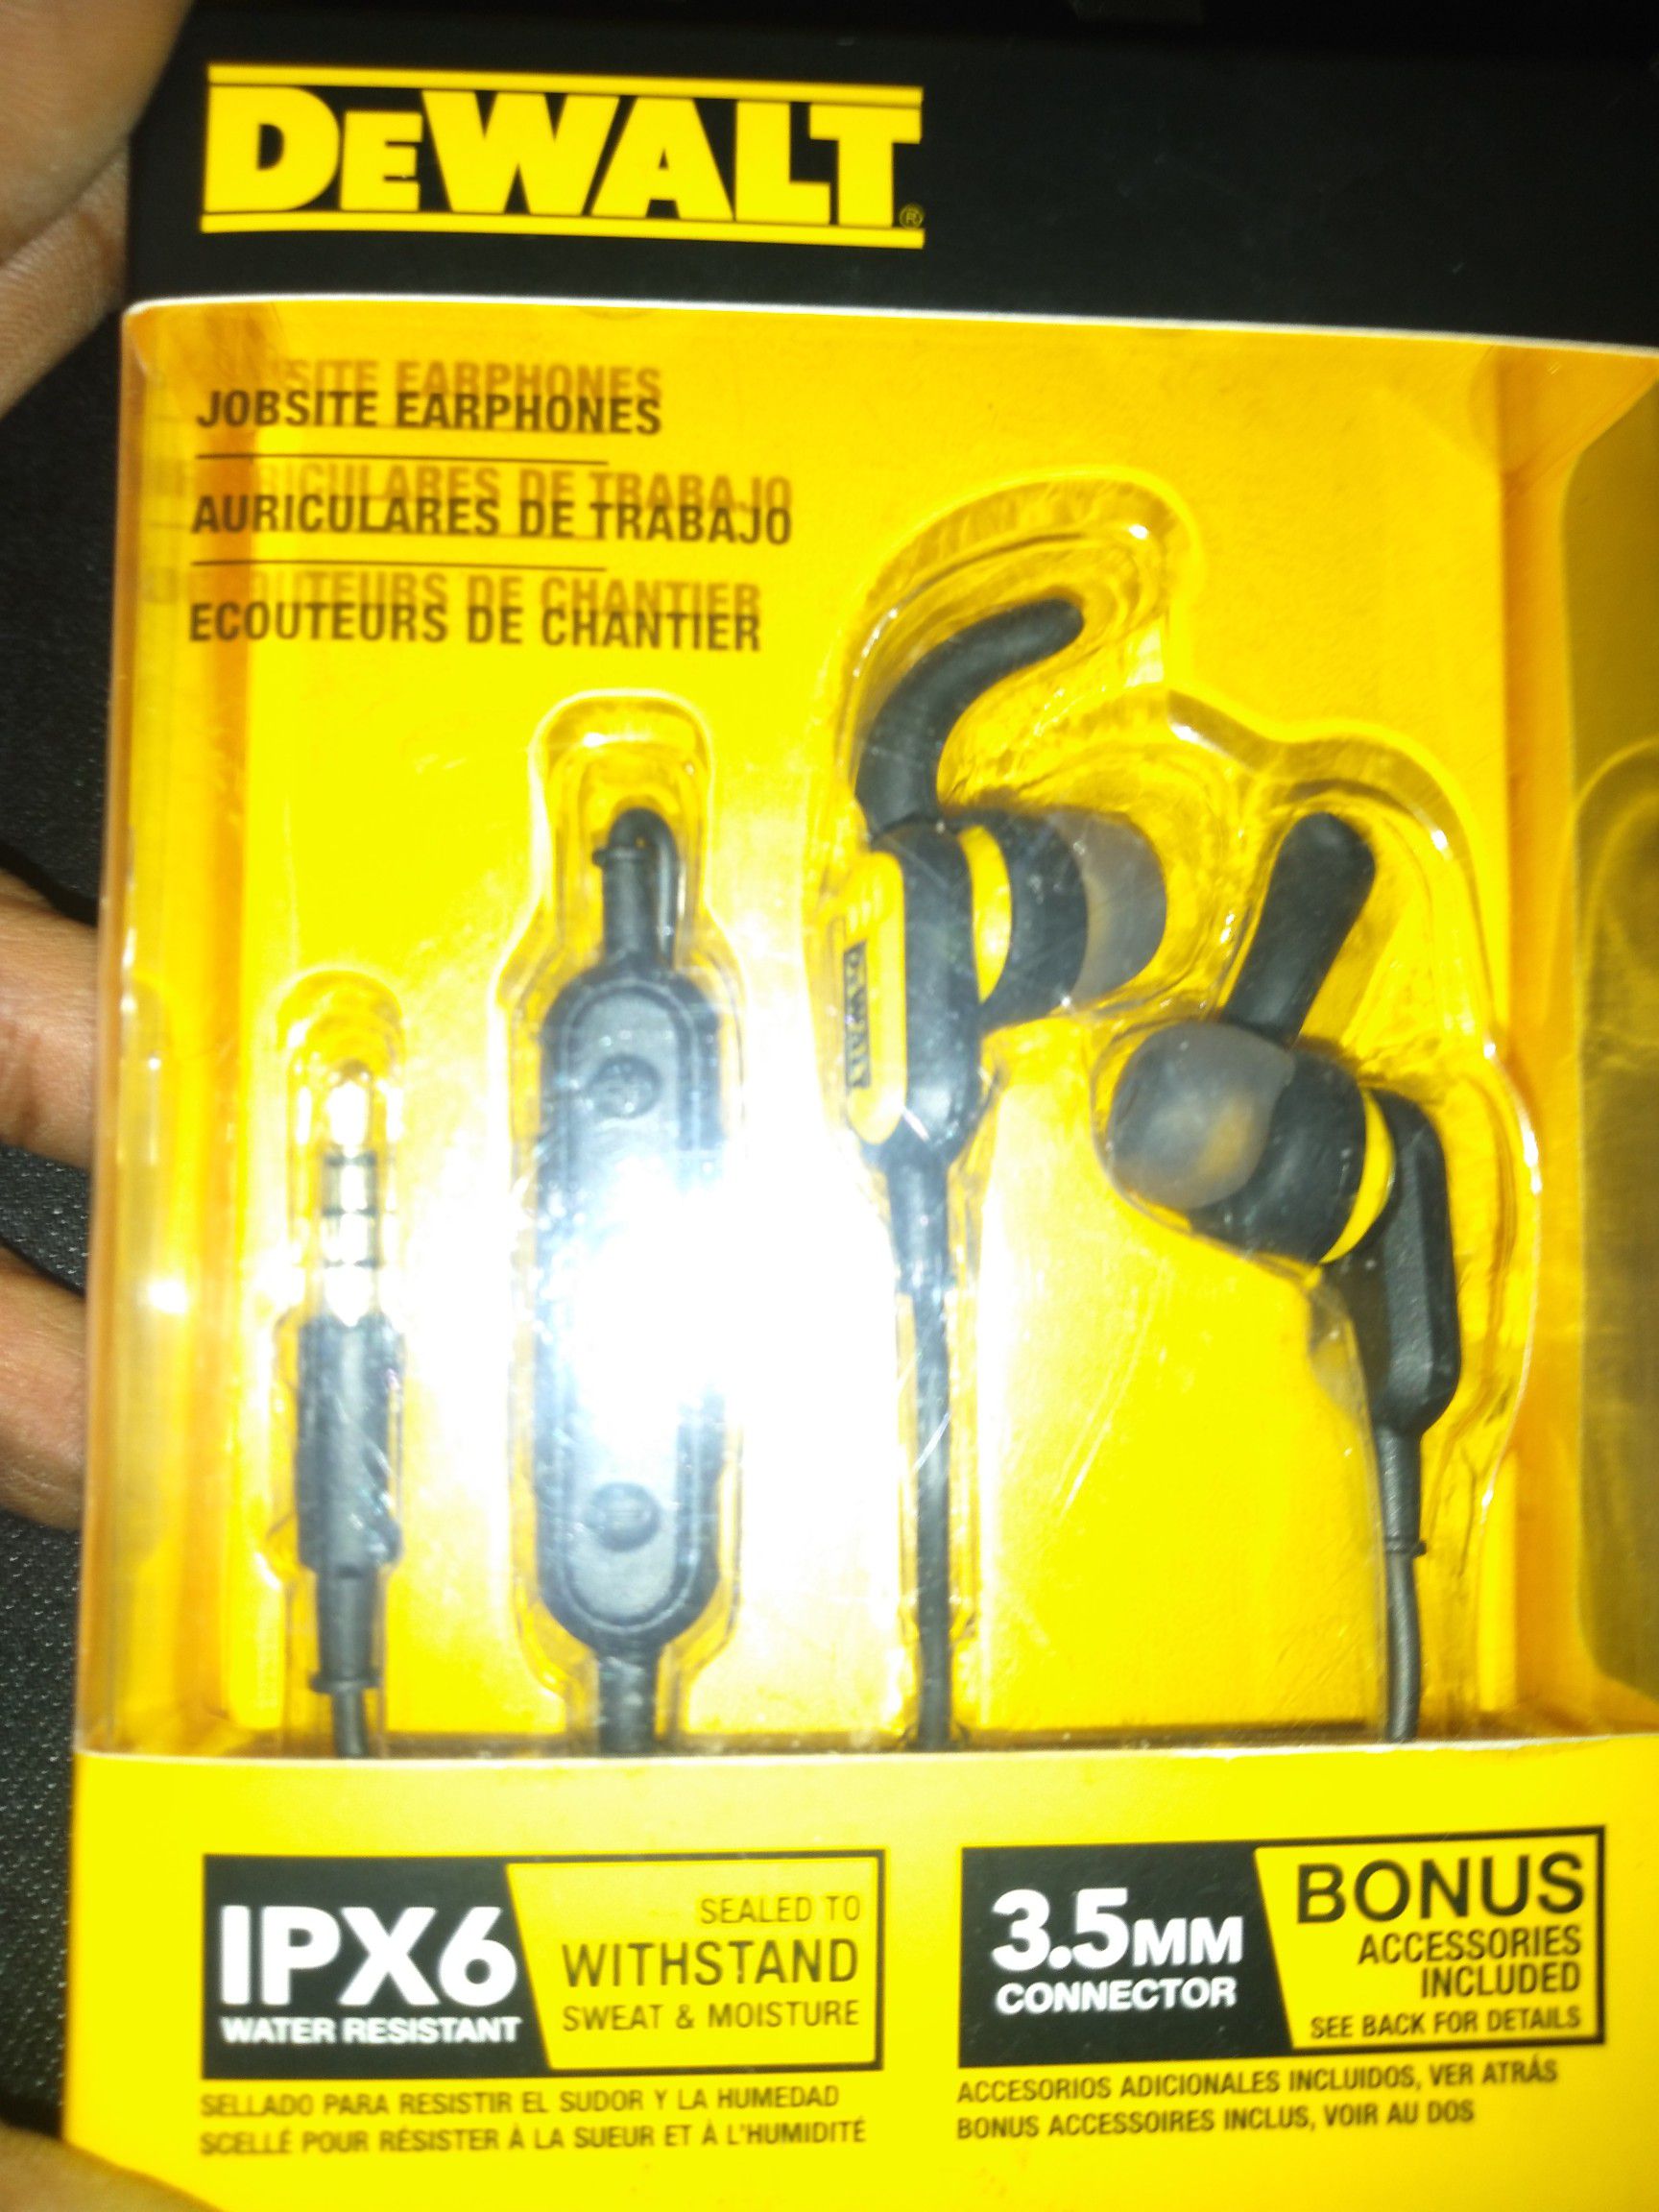 Brand New Dewalt Earbuds With Amazing Bass for Low Price